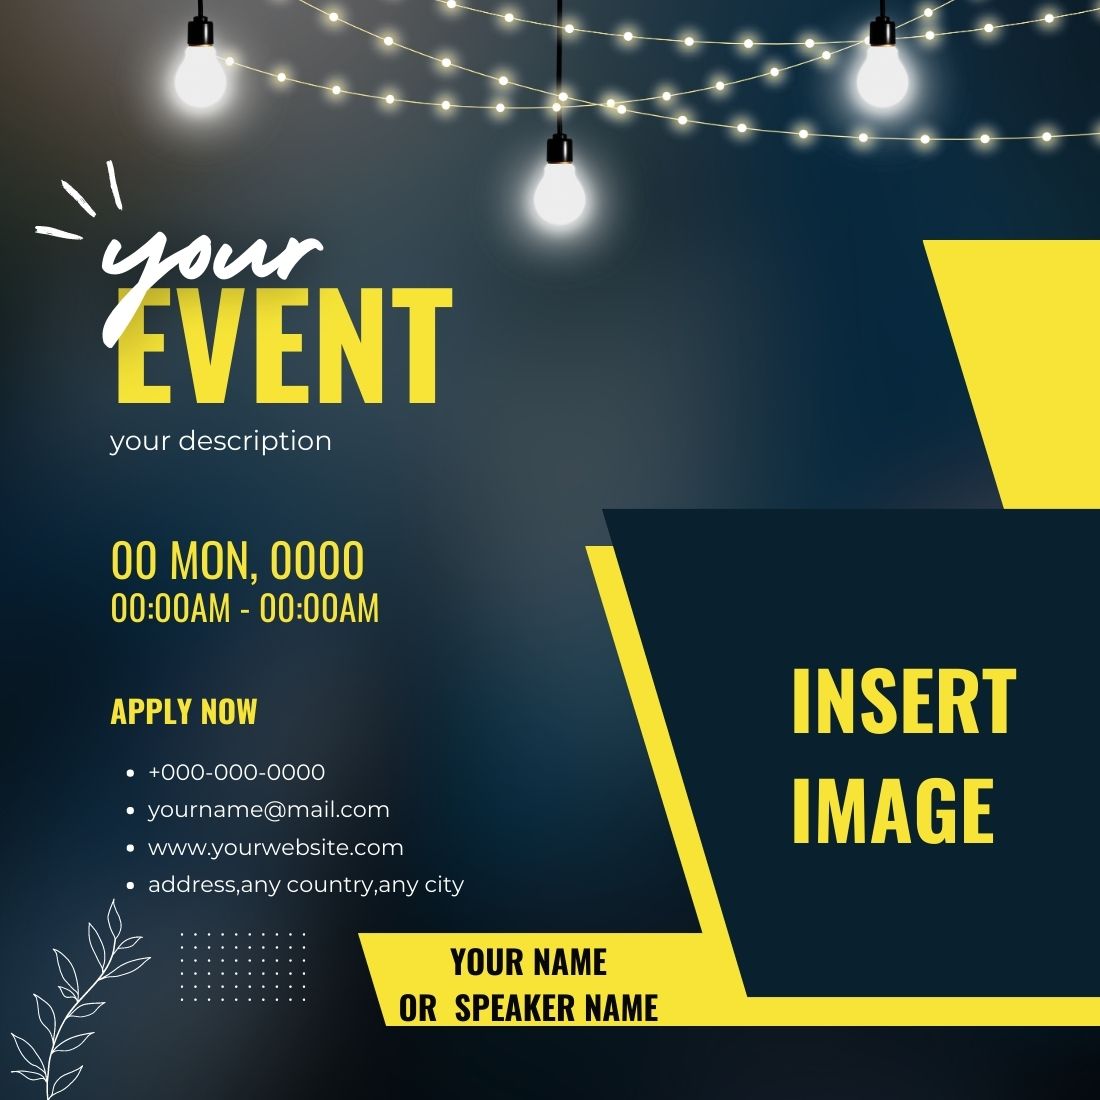 Template Design For Events In $6 Only cover image.